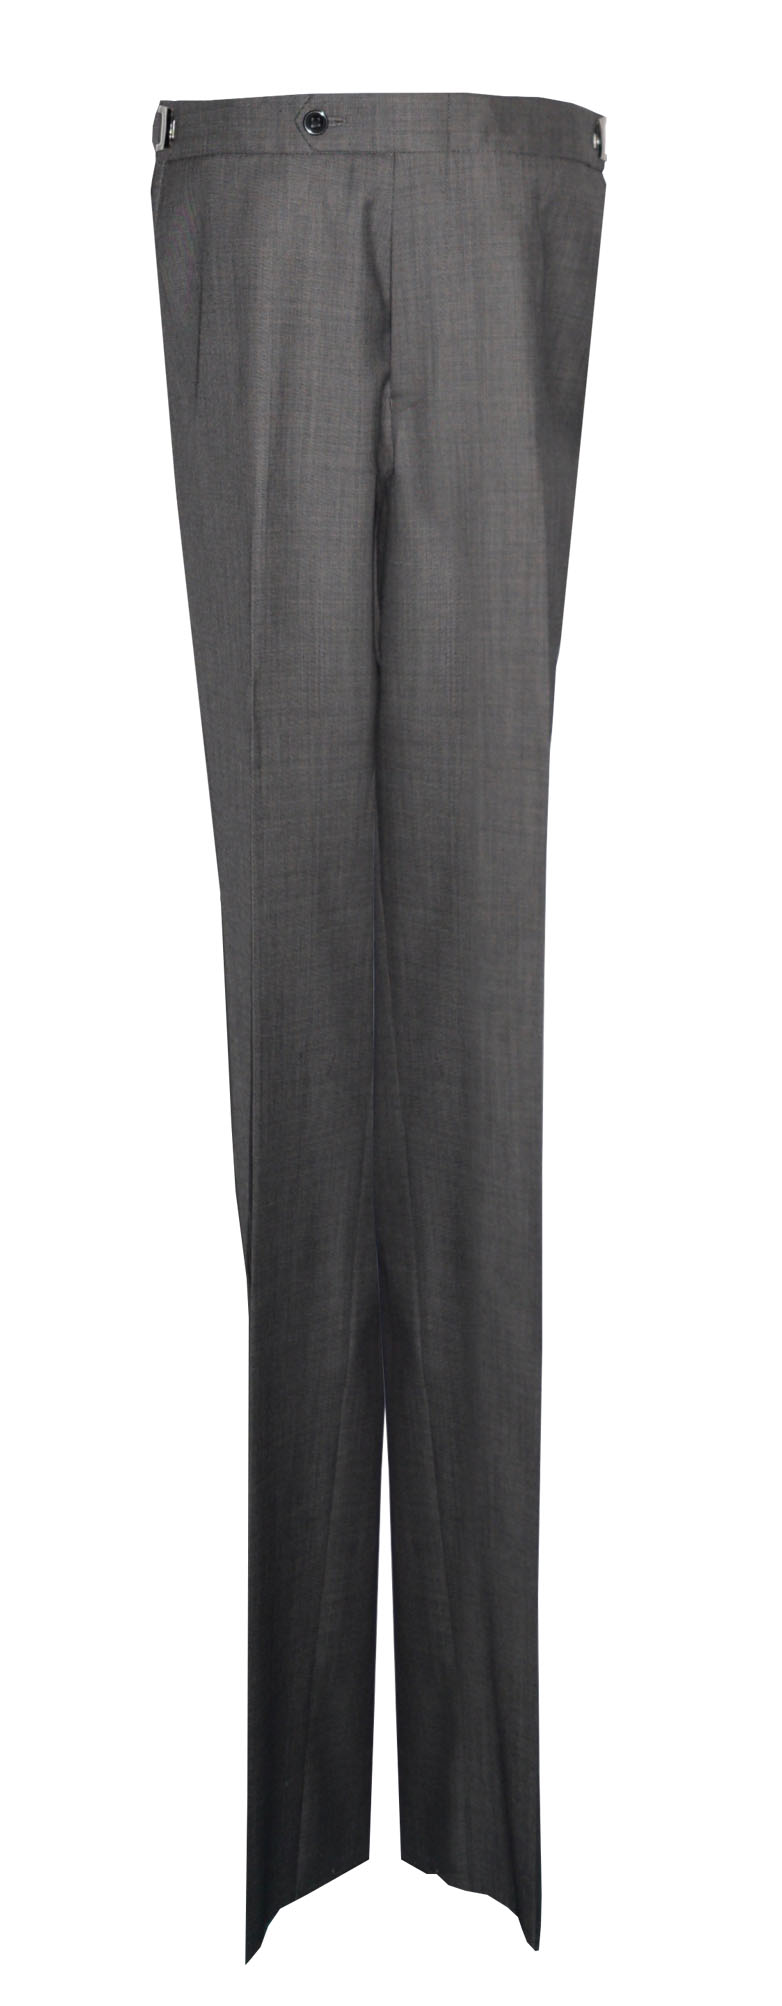 Used Gray Suit Pants